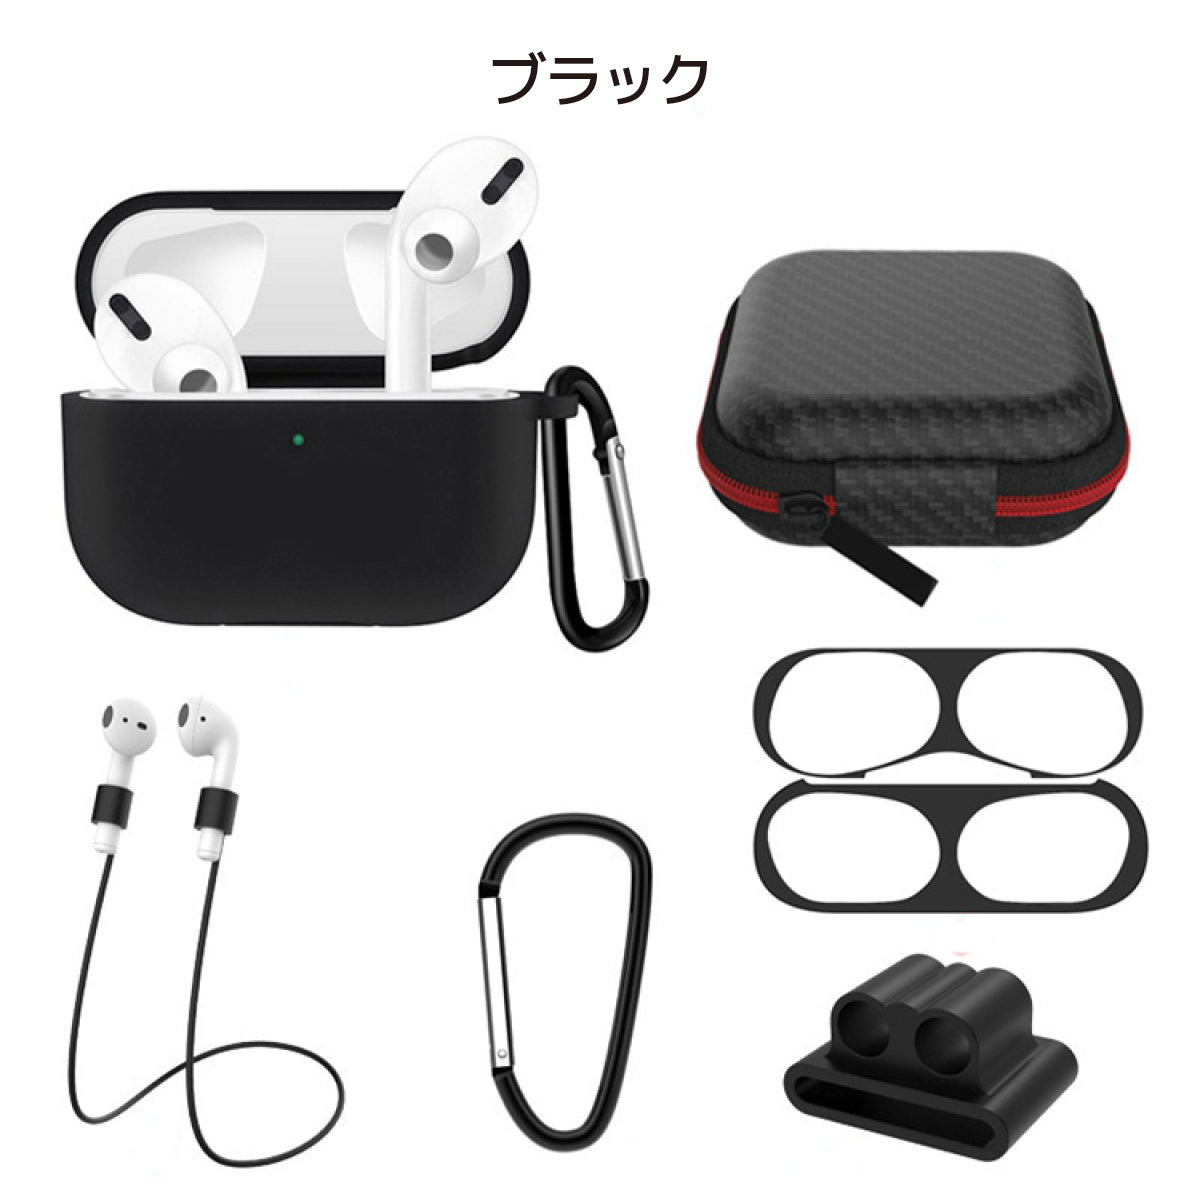 AirPods3 AirPodsPro ケース シリコン 収納ケース付き 6点セット エアーポッズプロ 落下防止 耐衝撃 吸収 装着充電可能 第3世代 第2世代 エアーポッズプロ 黒 白 青